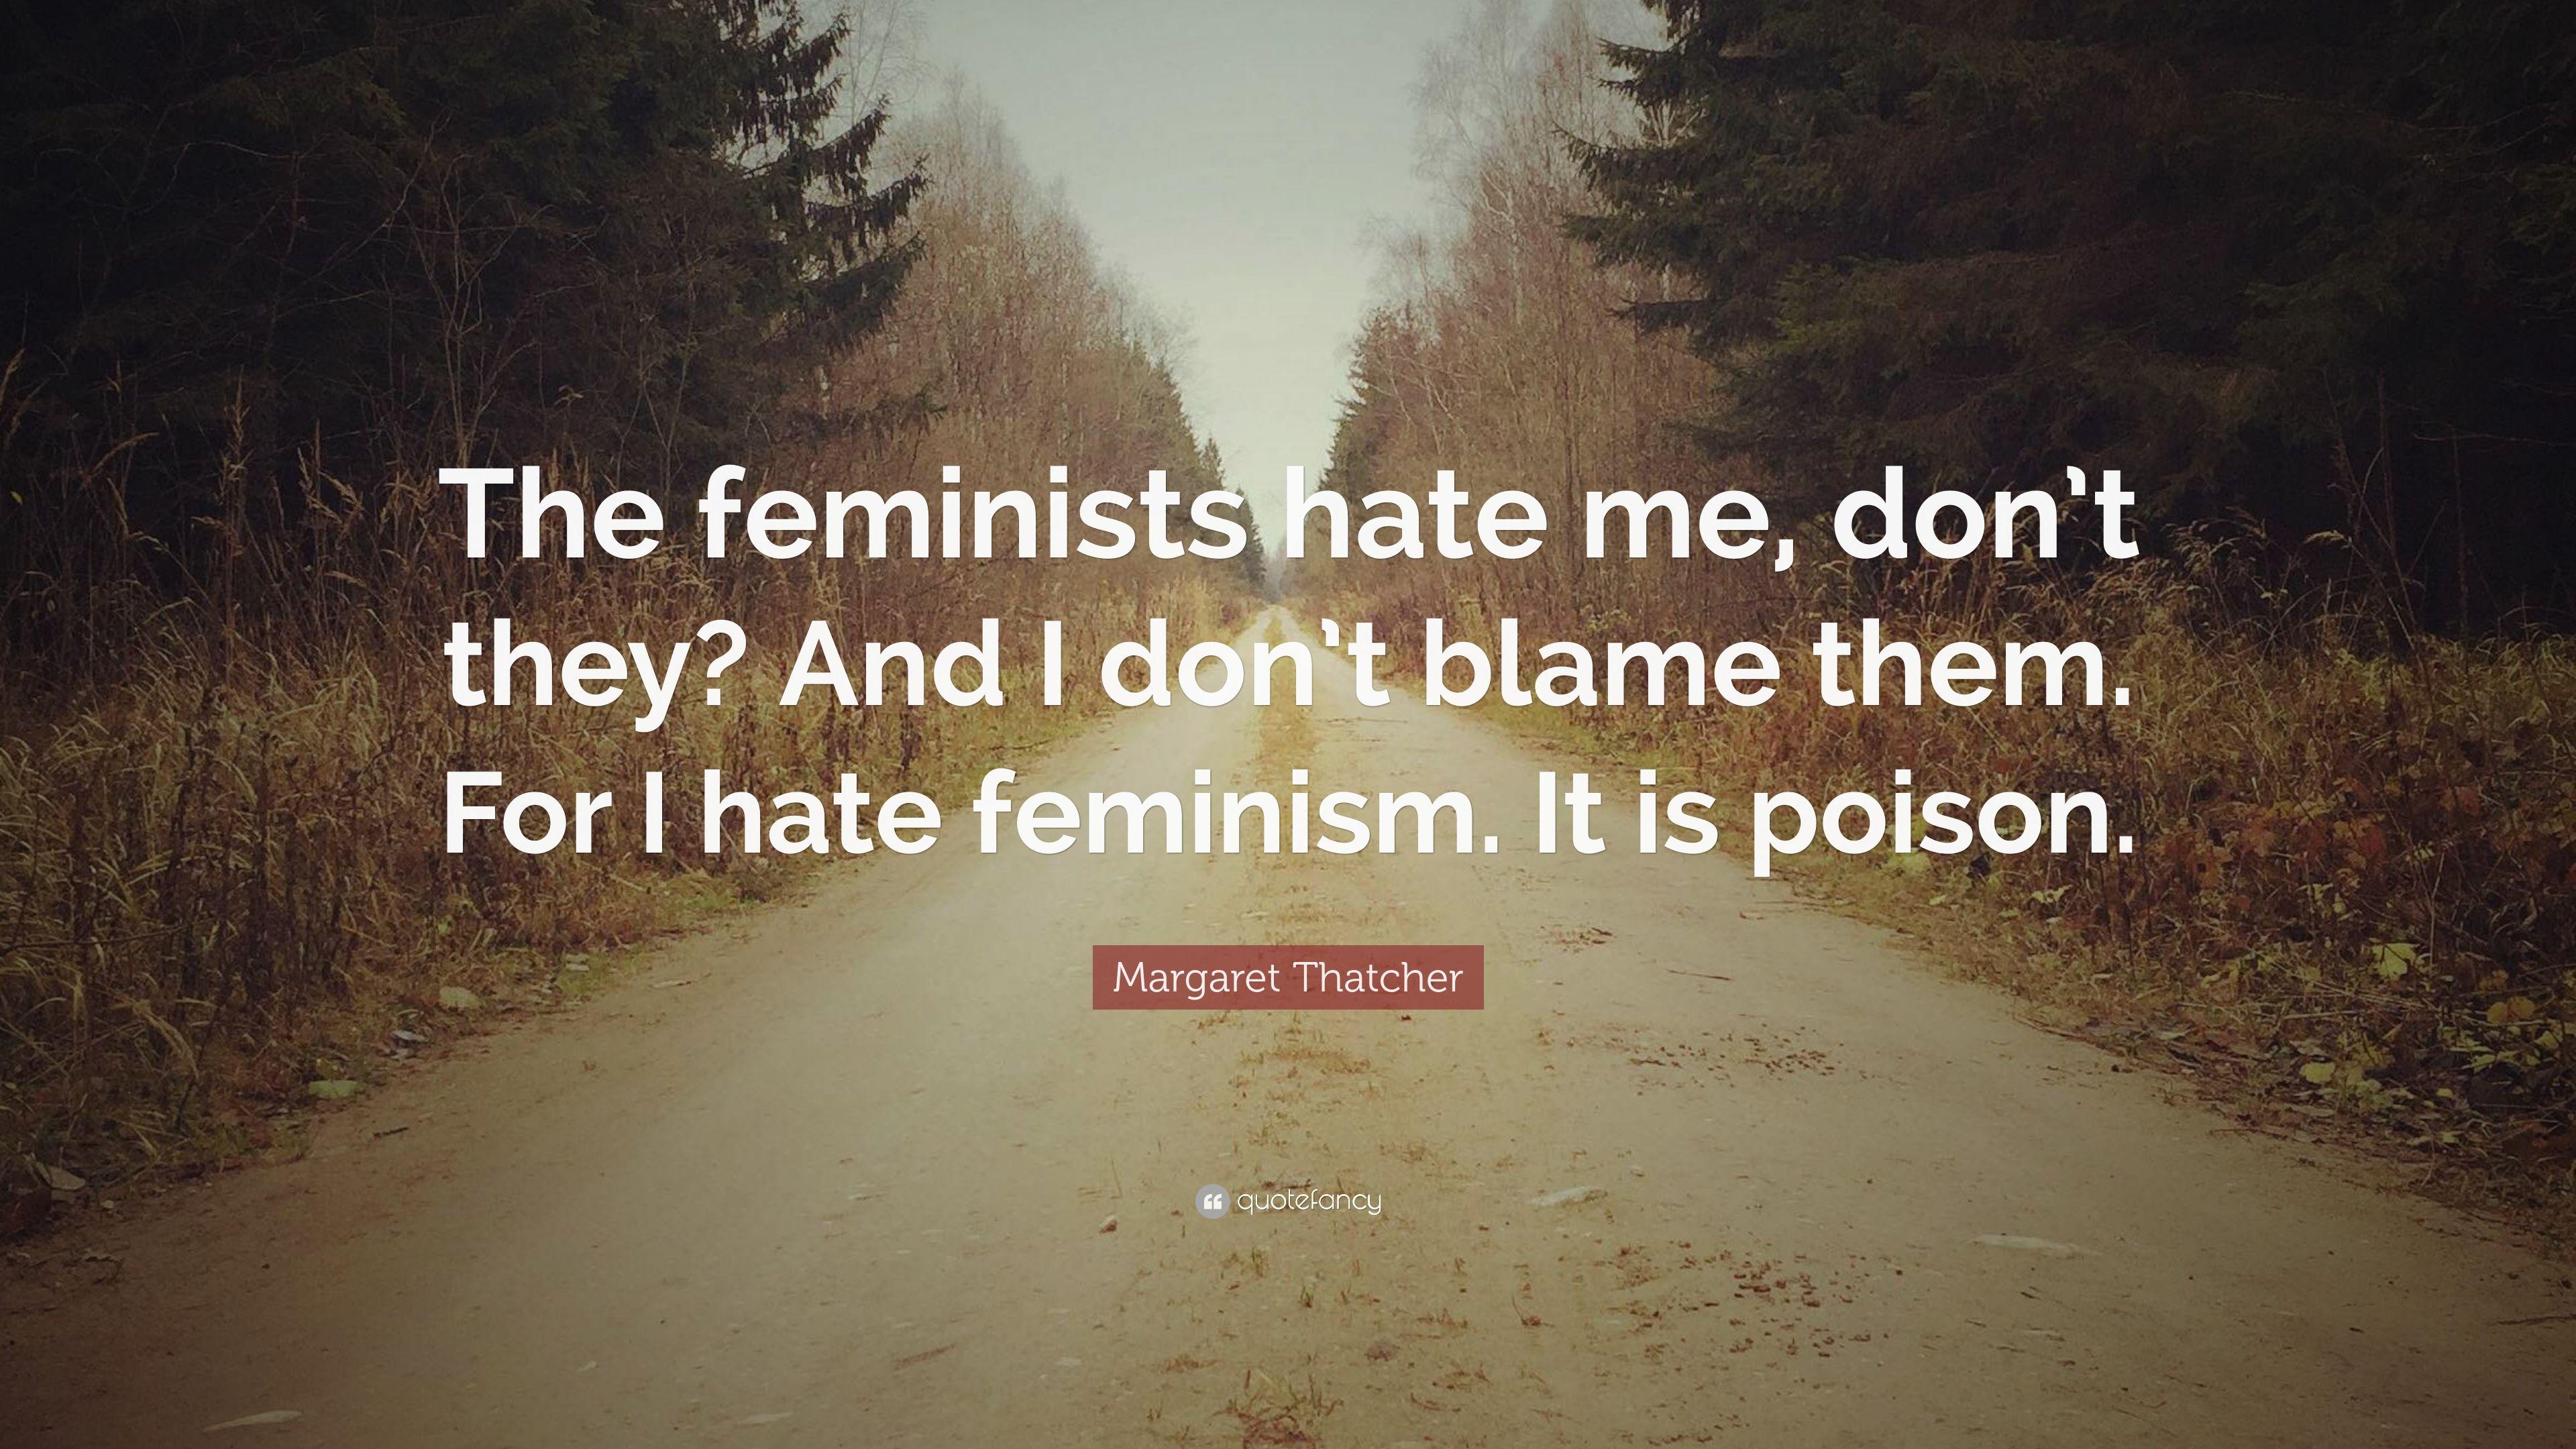 Margaret Thatcher Quote: “The feminists hate me, don't they? And I